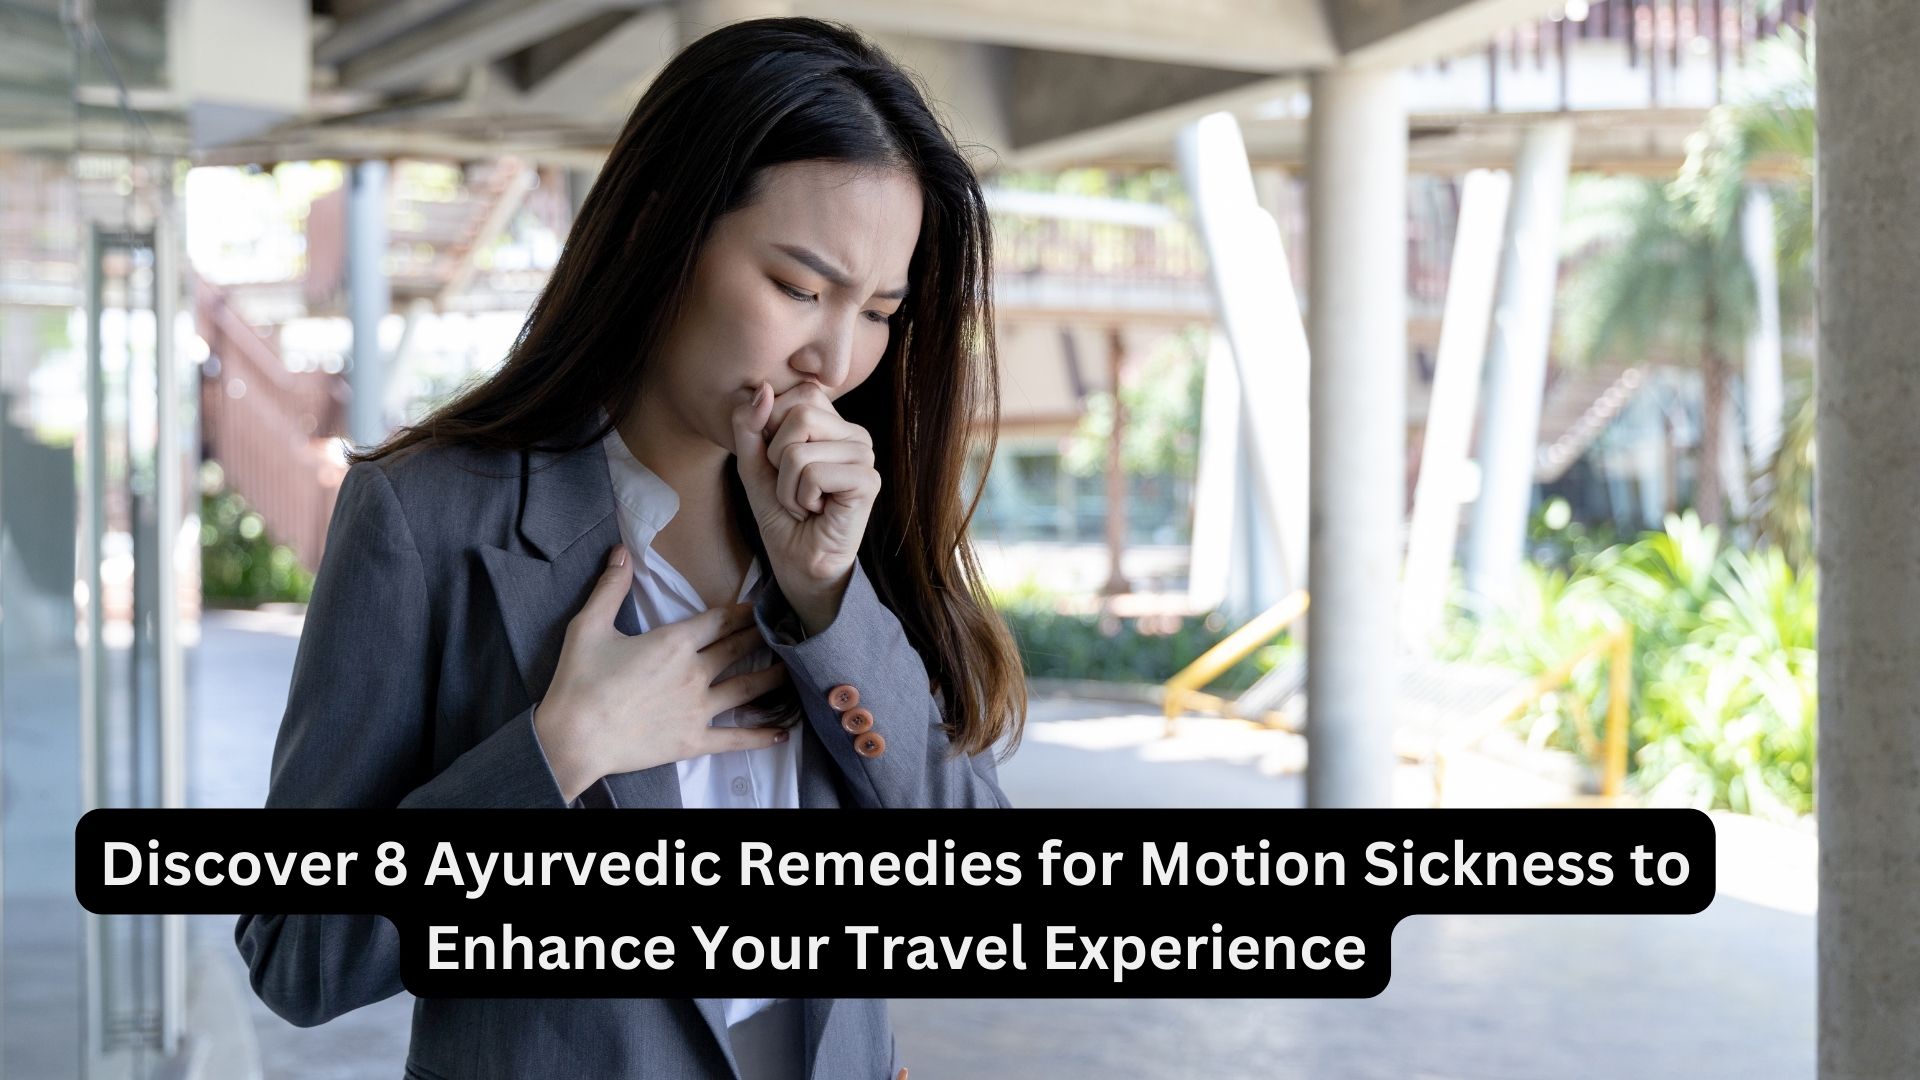 Discover 8 Ayurvedic Remedies for Motion Sickness to Enhance Your Travel Experience